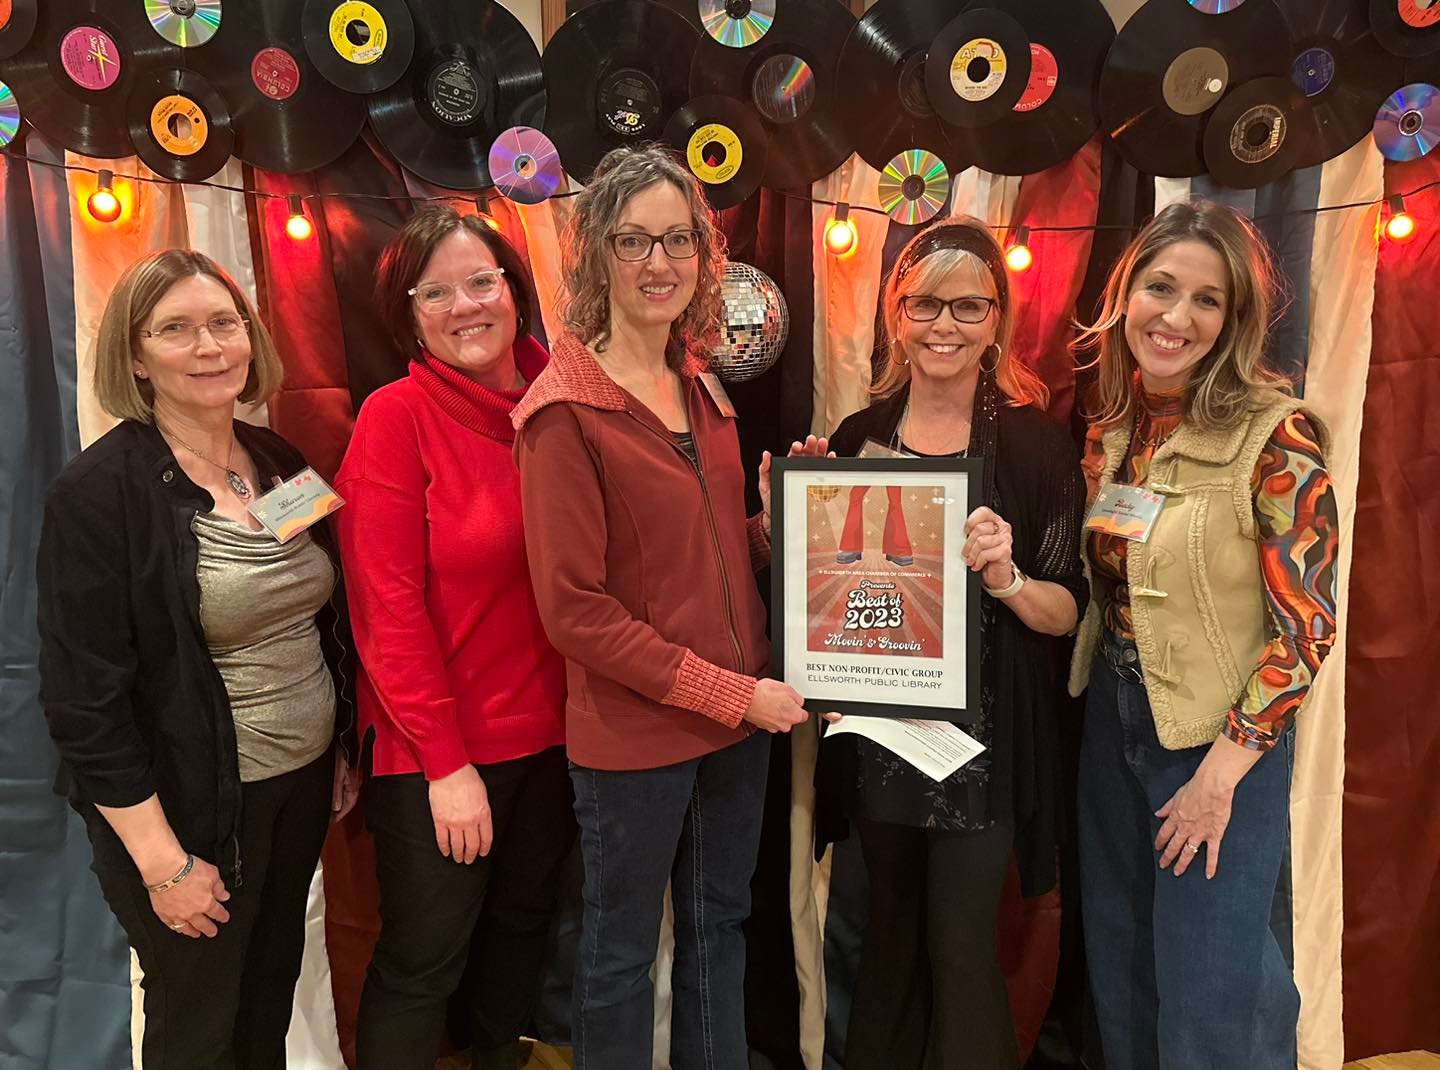 The Best Non-Profit Organization award went to Ellsworth Public Library. Pictured are (from left) Friends of the Ellsworth Library member Sharon Schulze, Village Board Trustee and Library Board liaison Mindy Anderson, Library Director Tiffany Meyer, Chamber Board Director Julie Winger and Becky Beissel, Chamber executive team member.